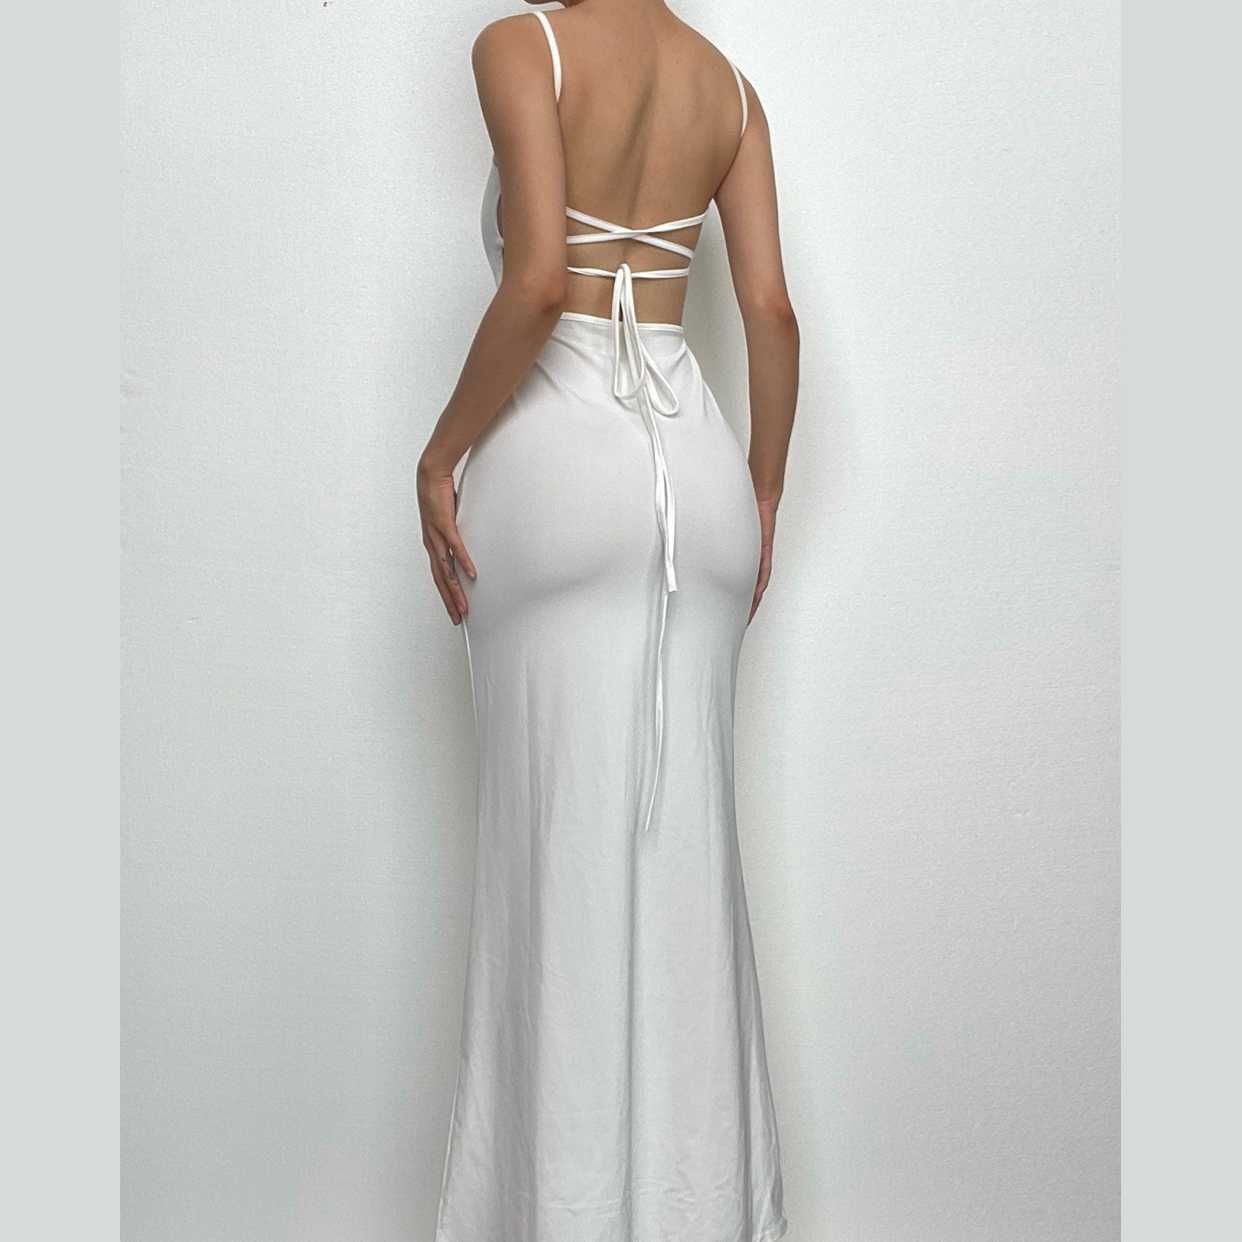 Backless hollow out low cut self tie solid cami maxi dress